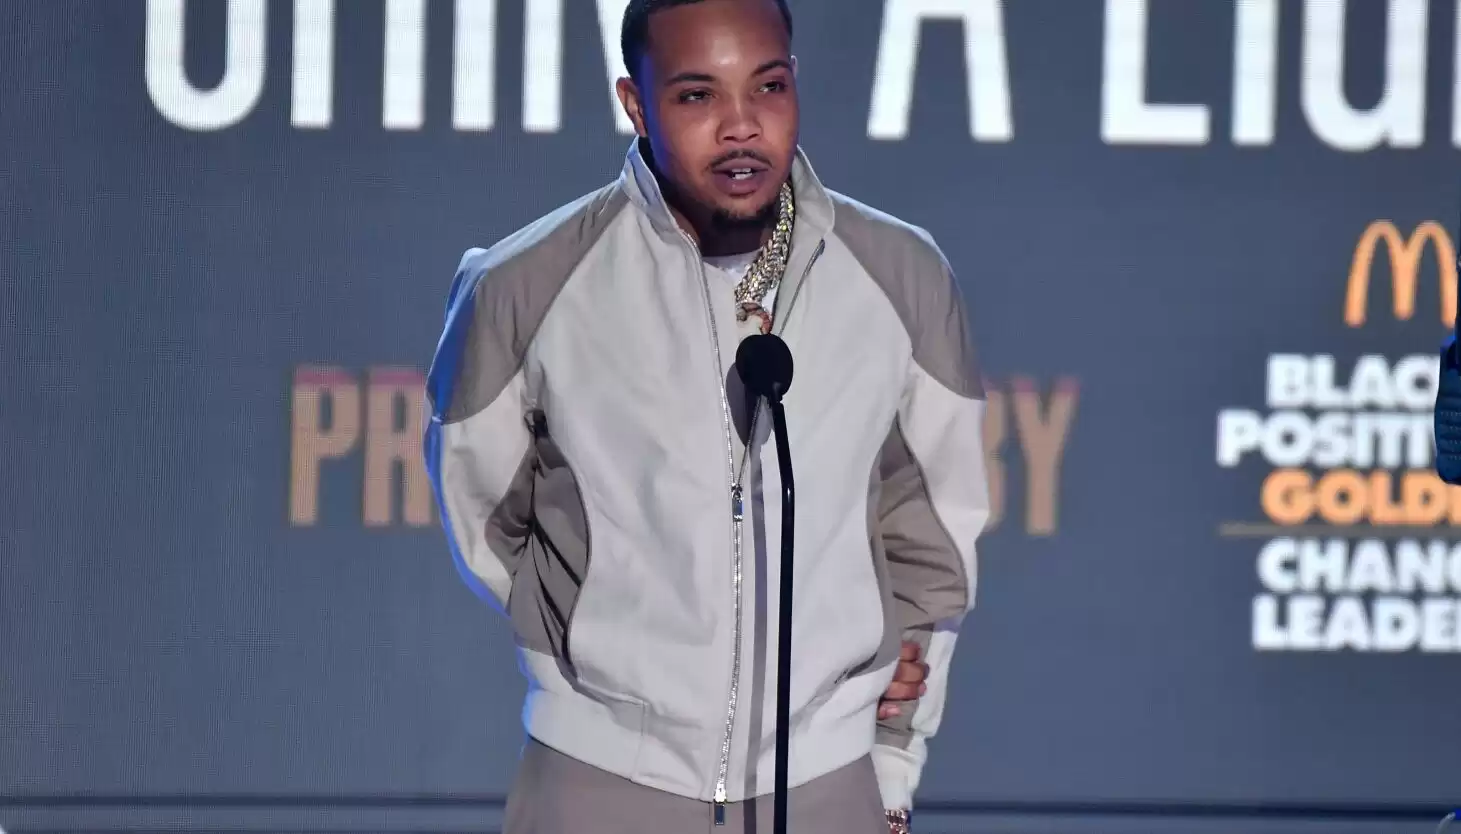 Rapper G Herbo admits guilt in utilizing stolen credit cards for private jets, luxury vehicles, and Jamaican villa stay